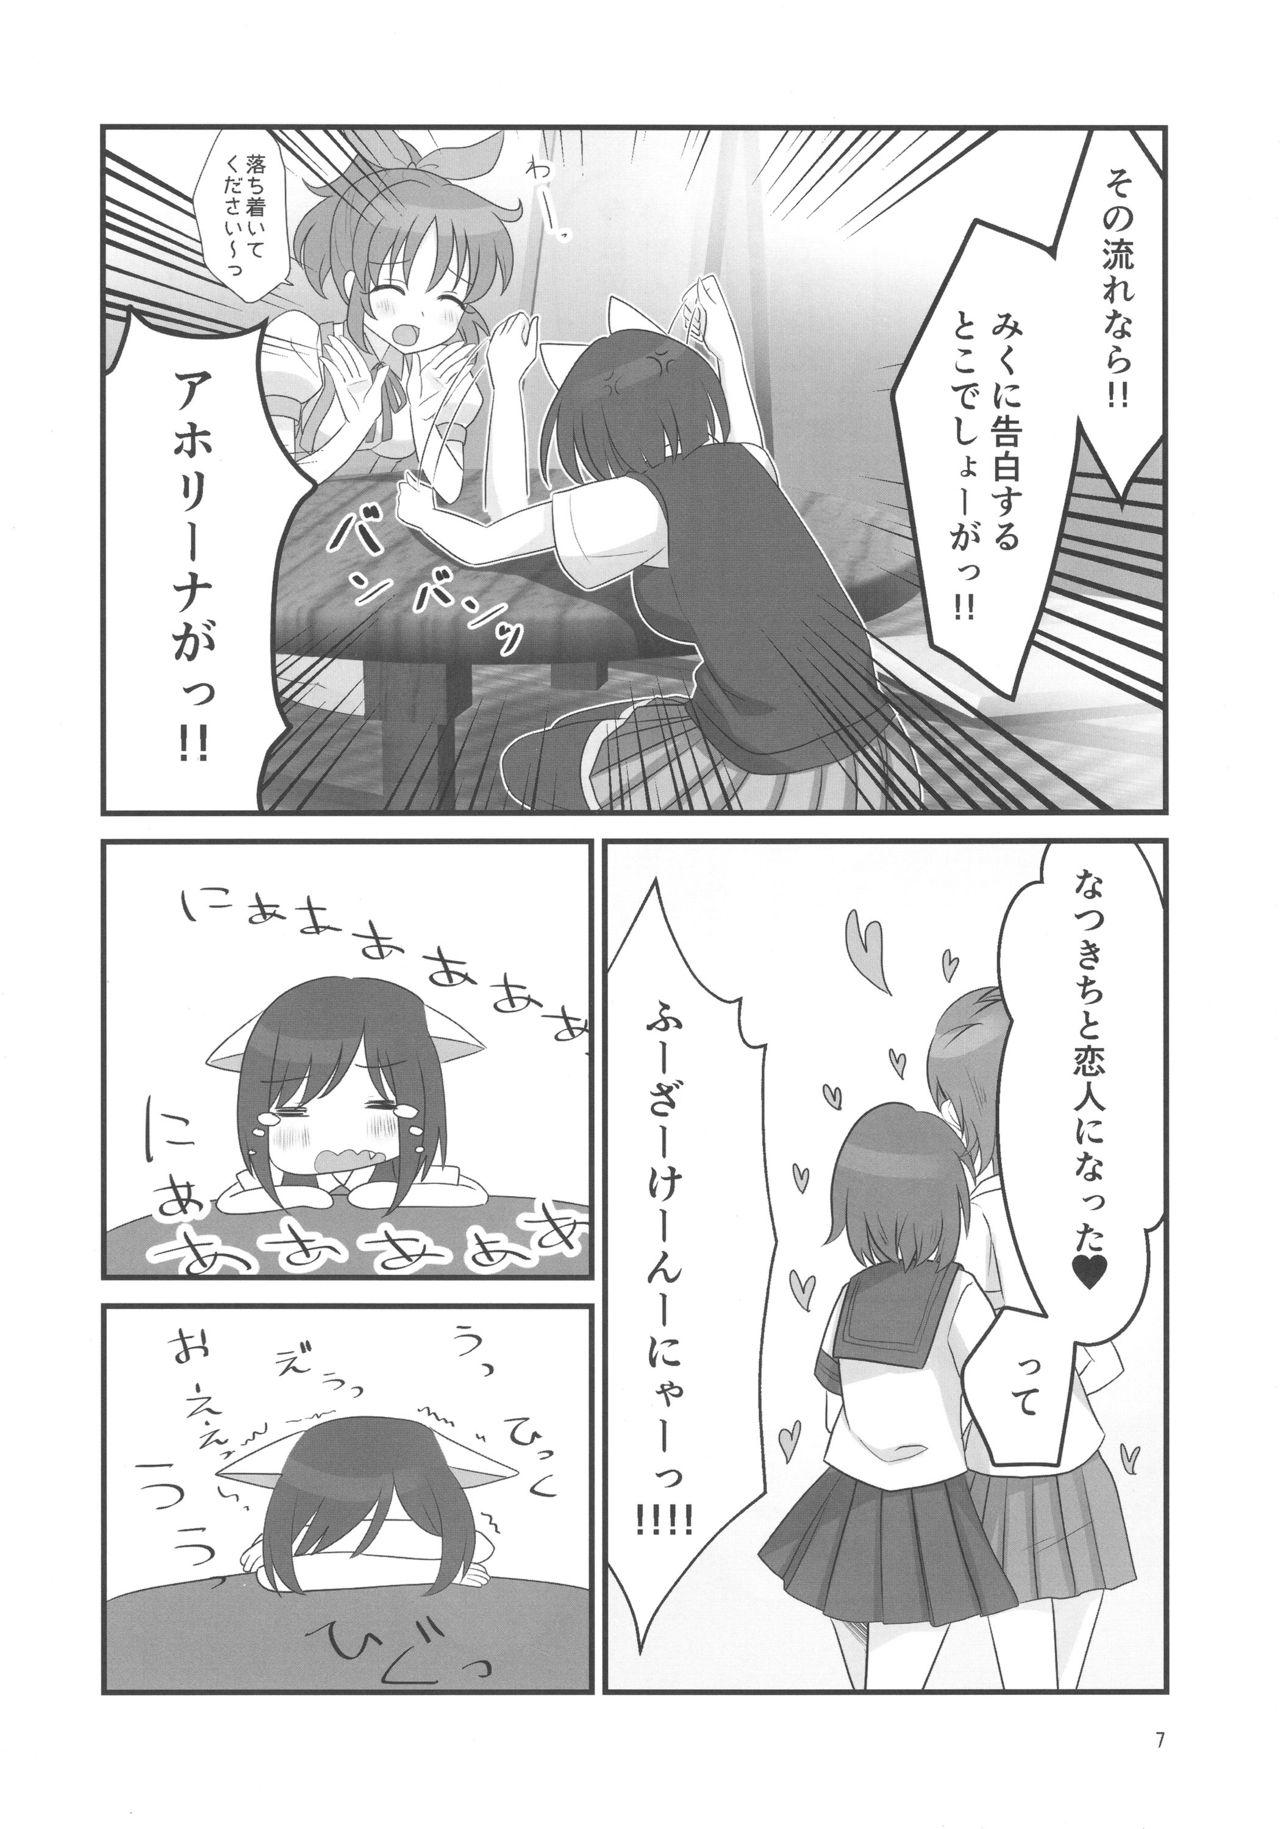 Dancing Double Aste - The idolmaster Sola - Page 7